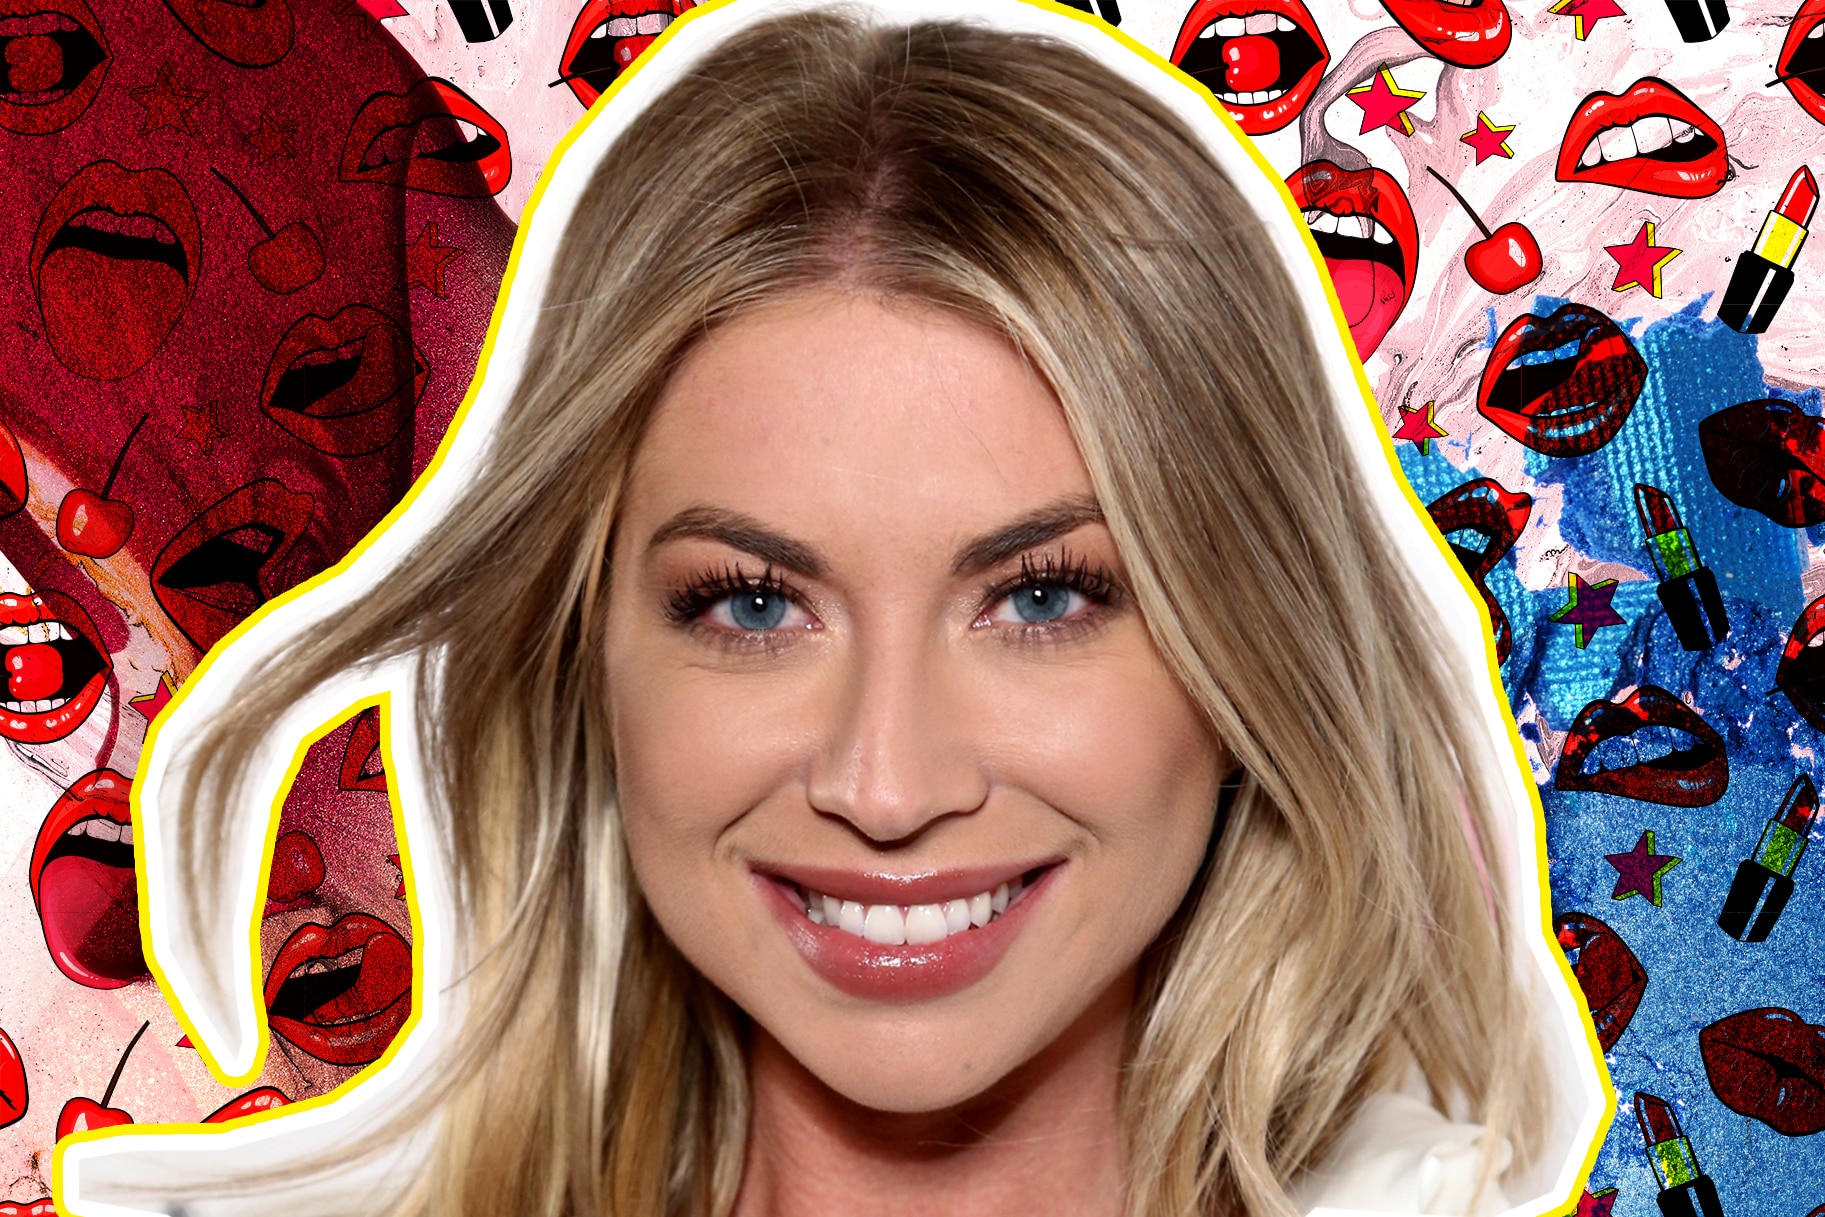 Stassi Schroeder Shares Hilarious Info on Chin Implants.